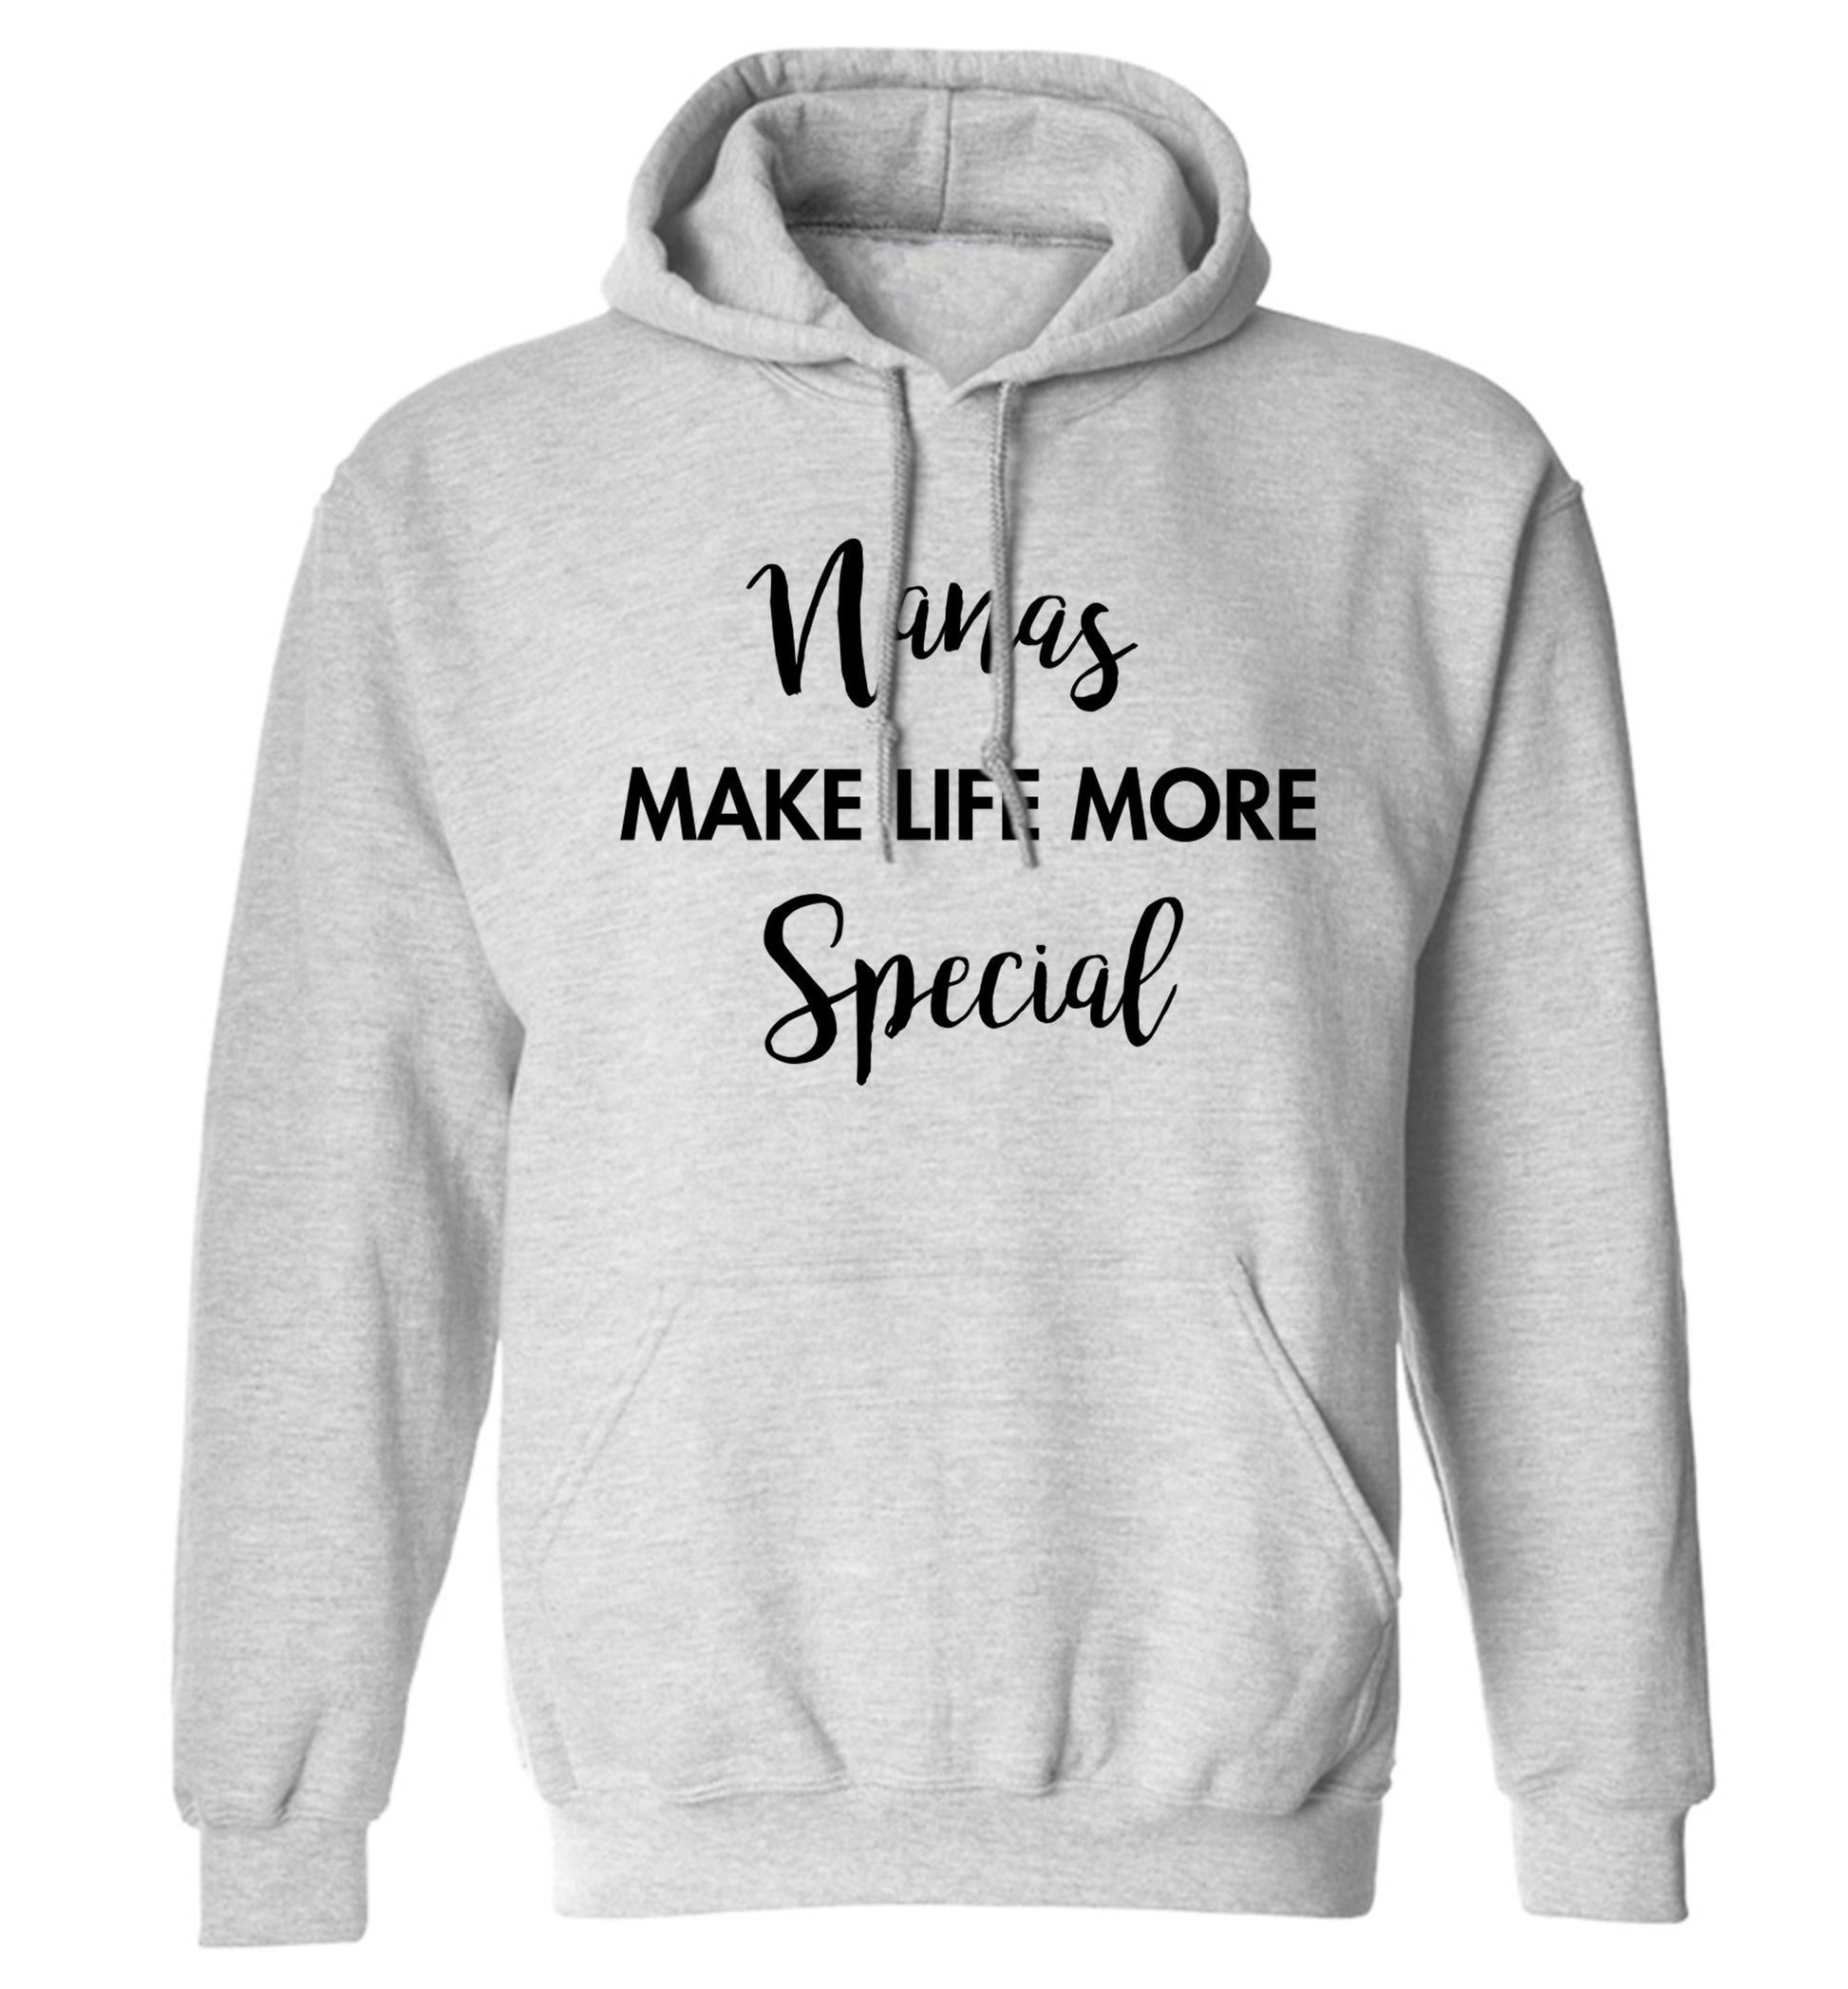 Nanas make life more special adults unisex grey hoodie 2XL